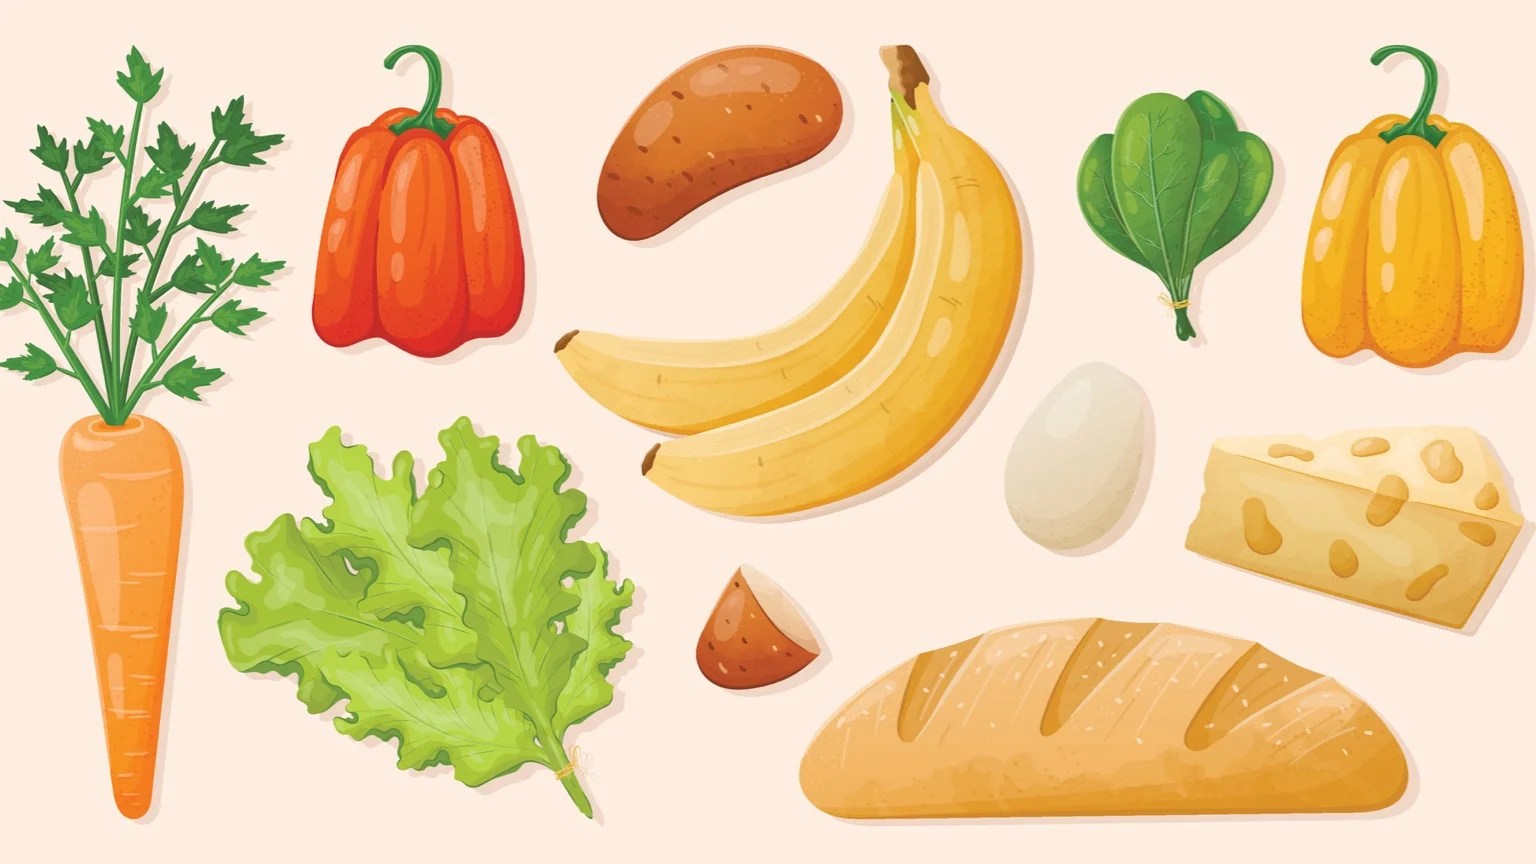 Some foods high in carbohydrates, including fruits and vegetables and bread.